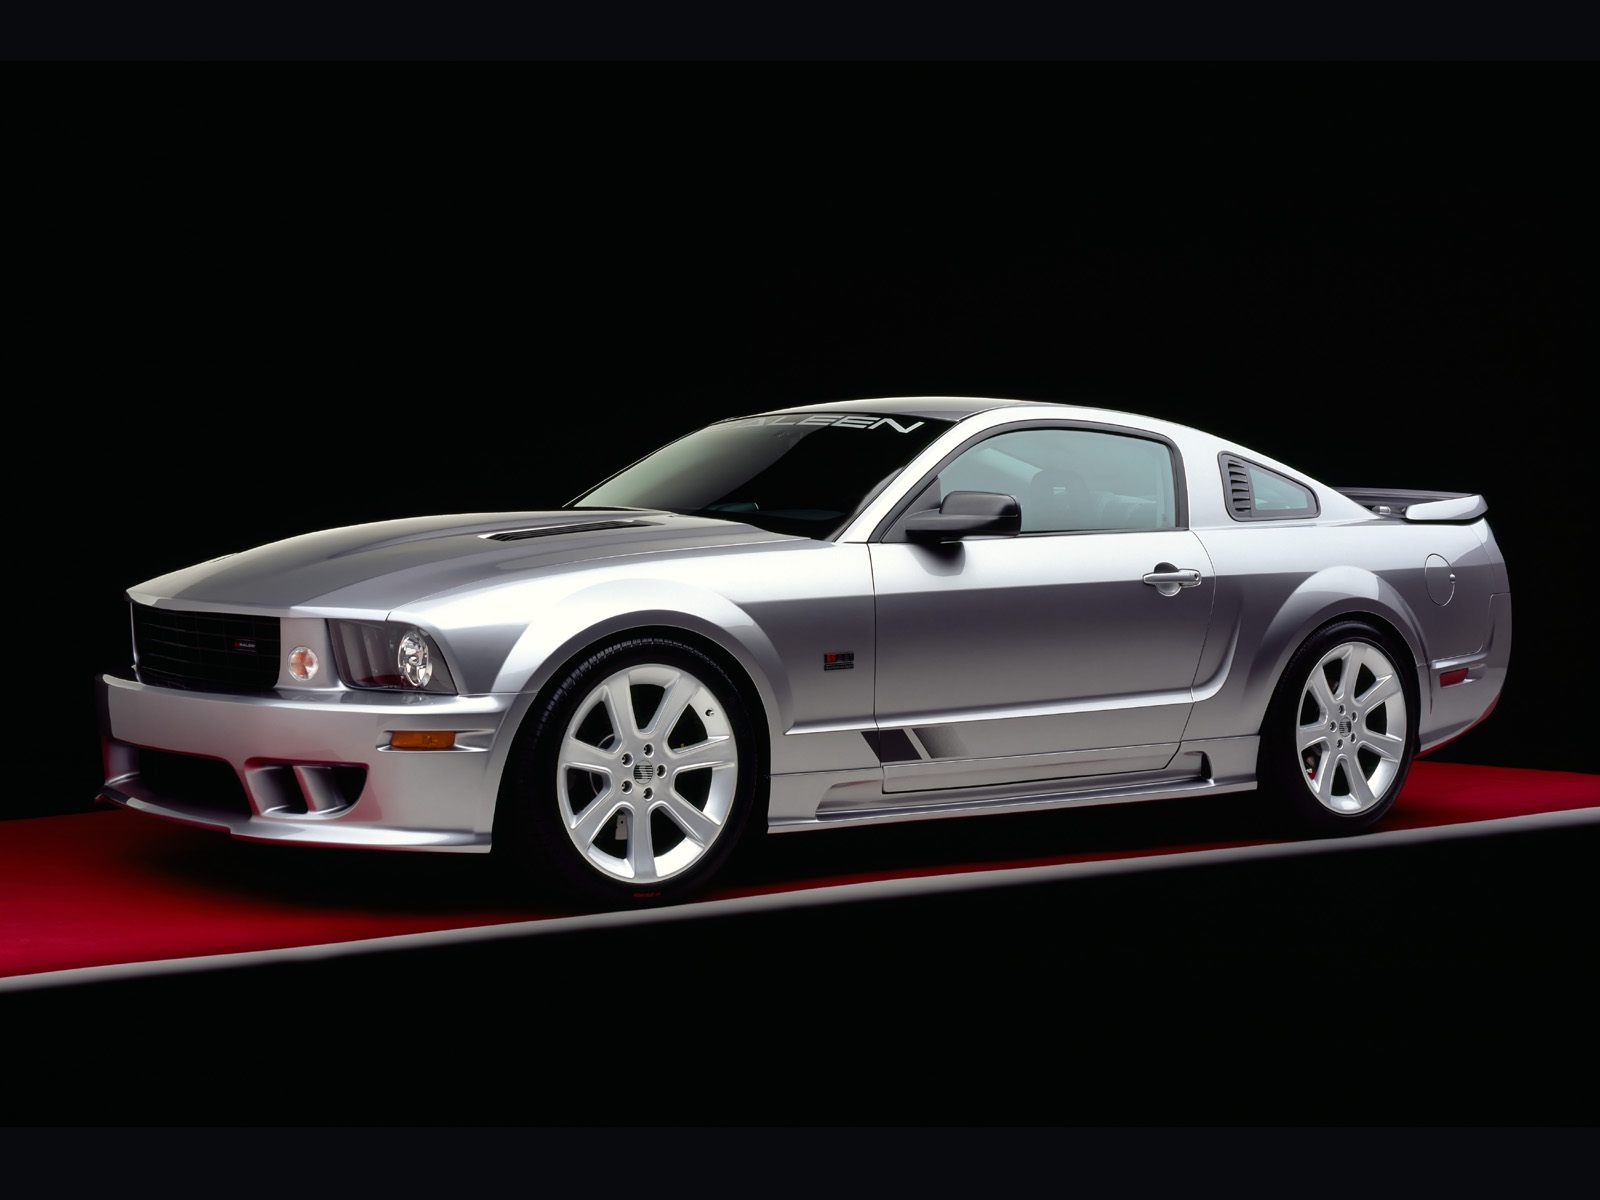 Wallpaper S Ford Mustang Car Huge Collection Of Amazing High